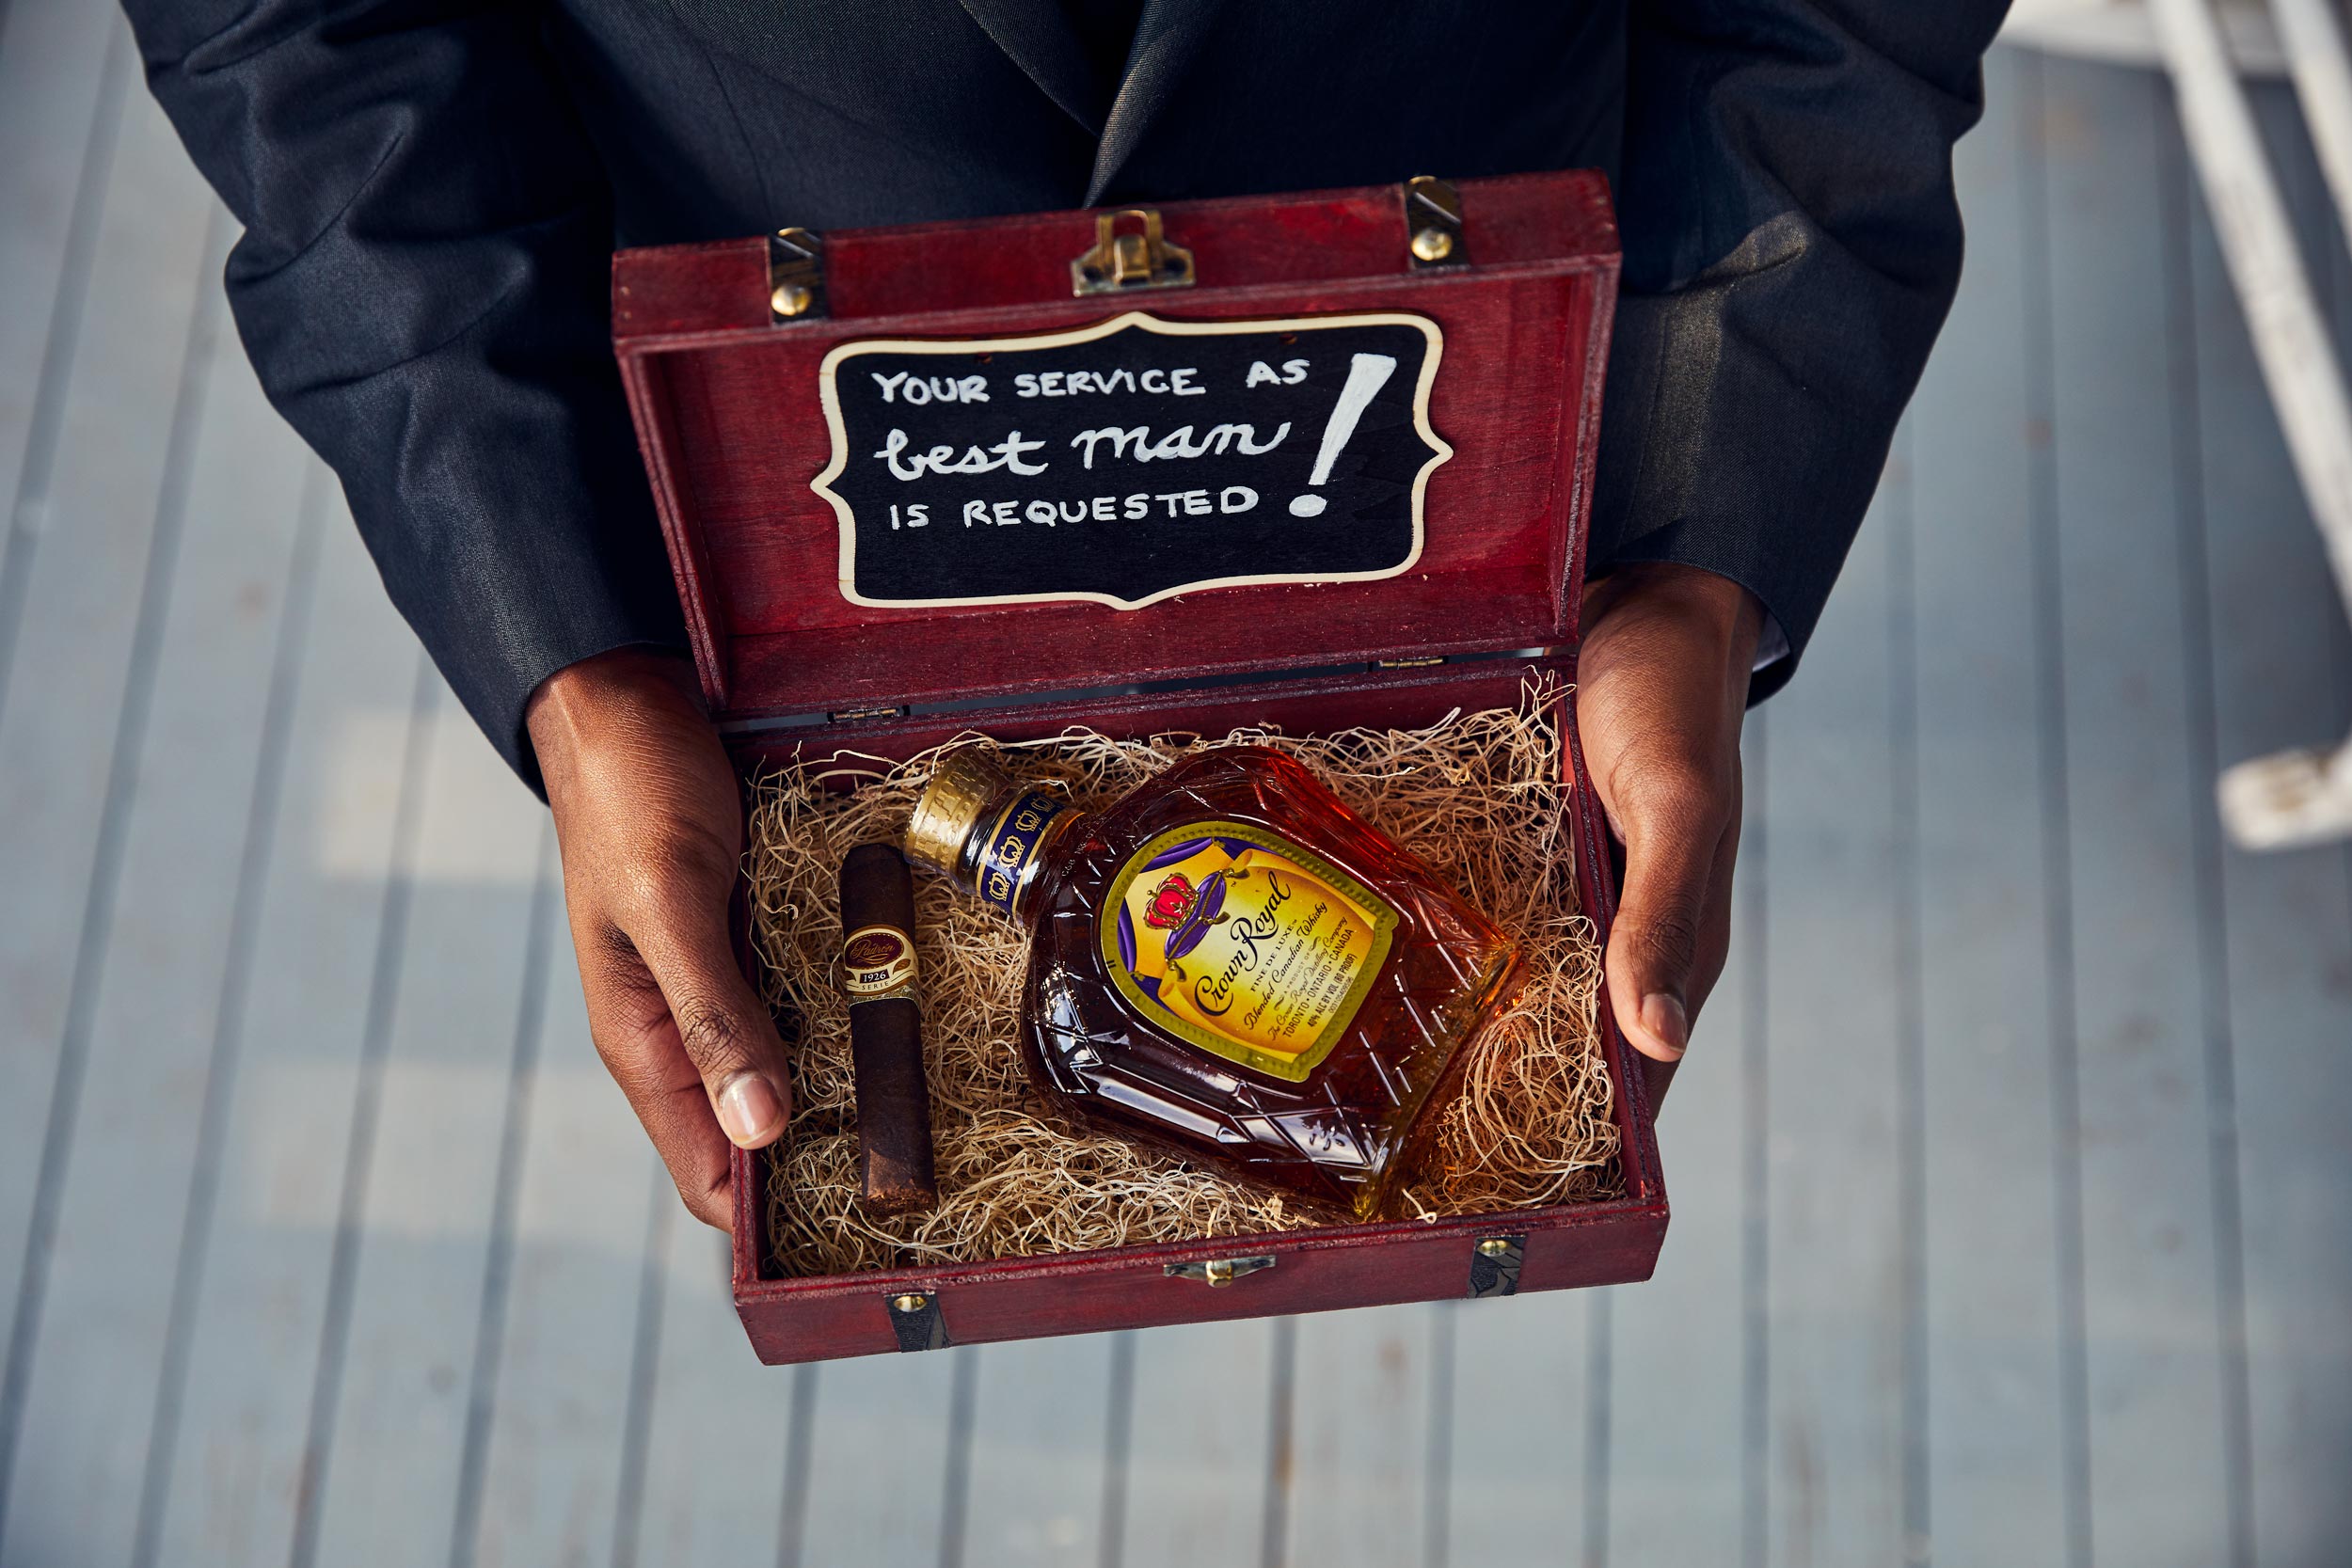 crown-royal-in-box-dc-commercial-photography-eli-meir-kaplan